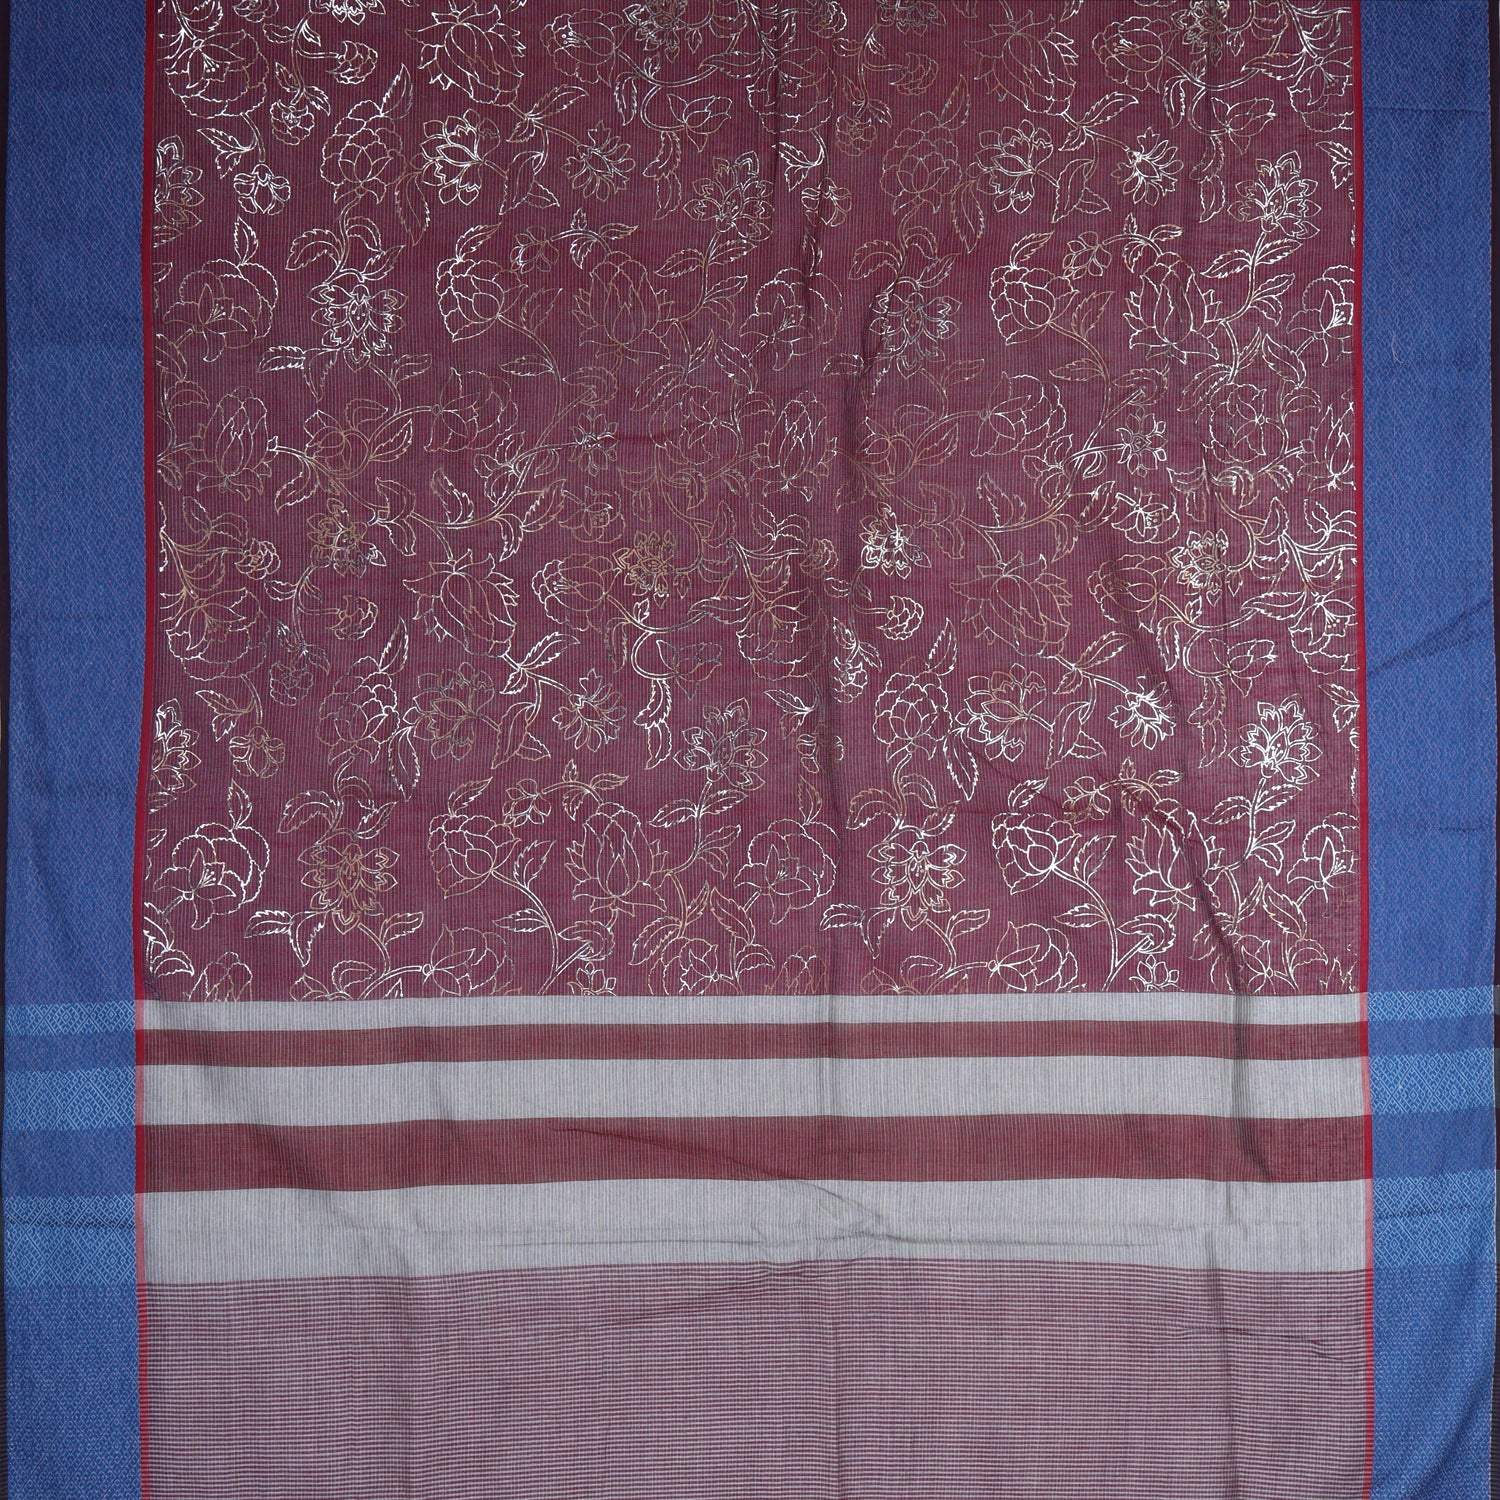 Brick Red Cotton Saree With Foil Printed Motifs - Singhania's